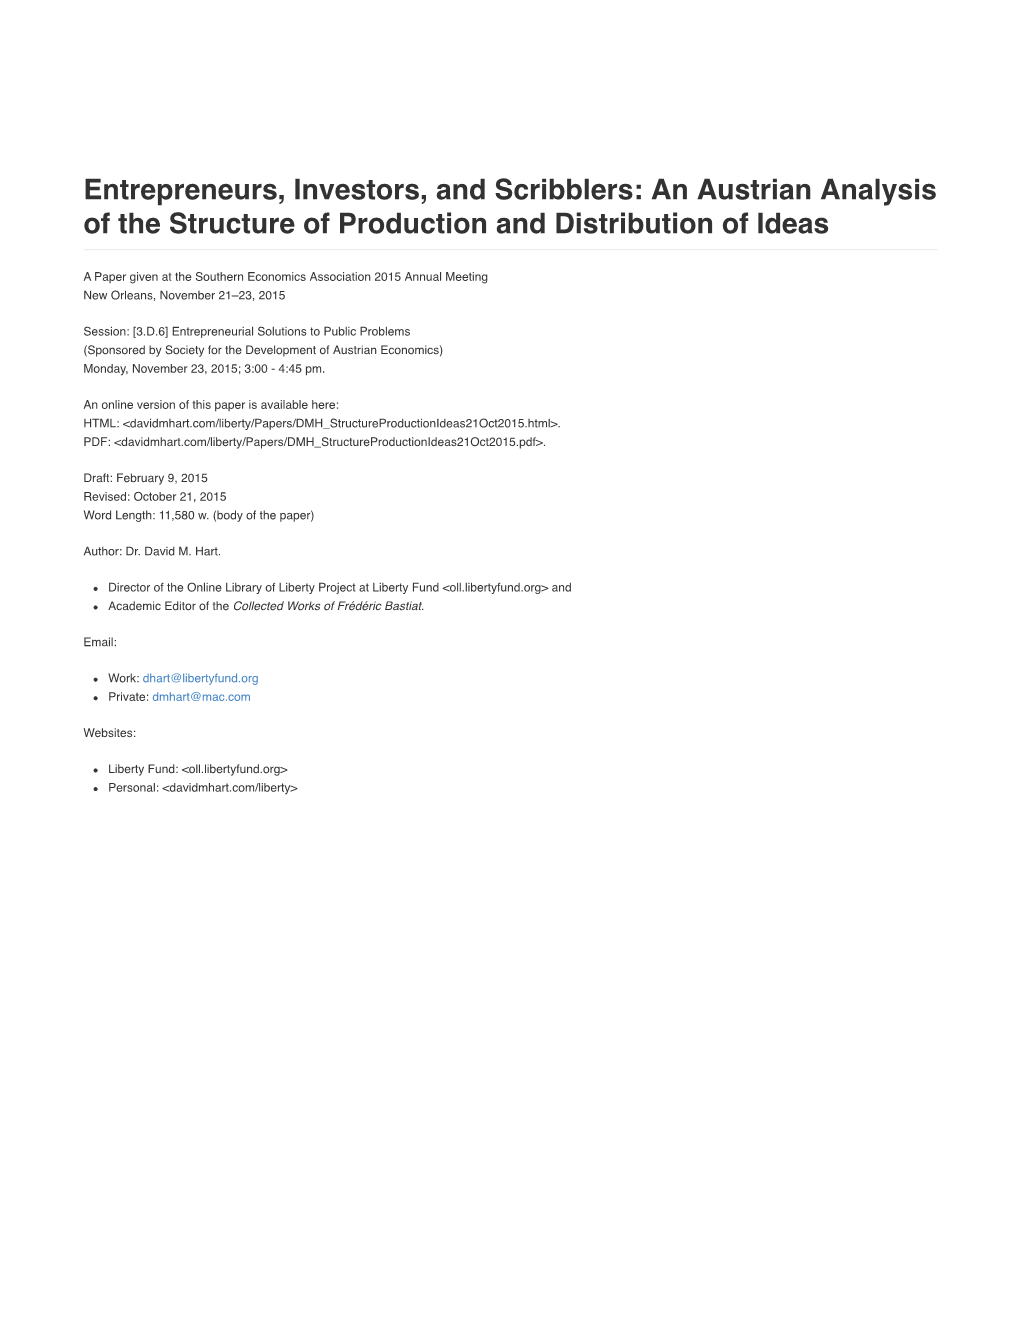 Entrepreneurs, Investors, and Scribblers: an Austrian Analysis of the Structure of Production and Distribution of Ideas